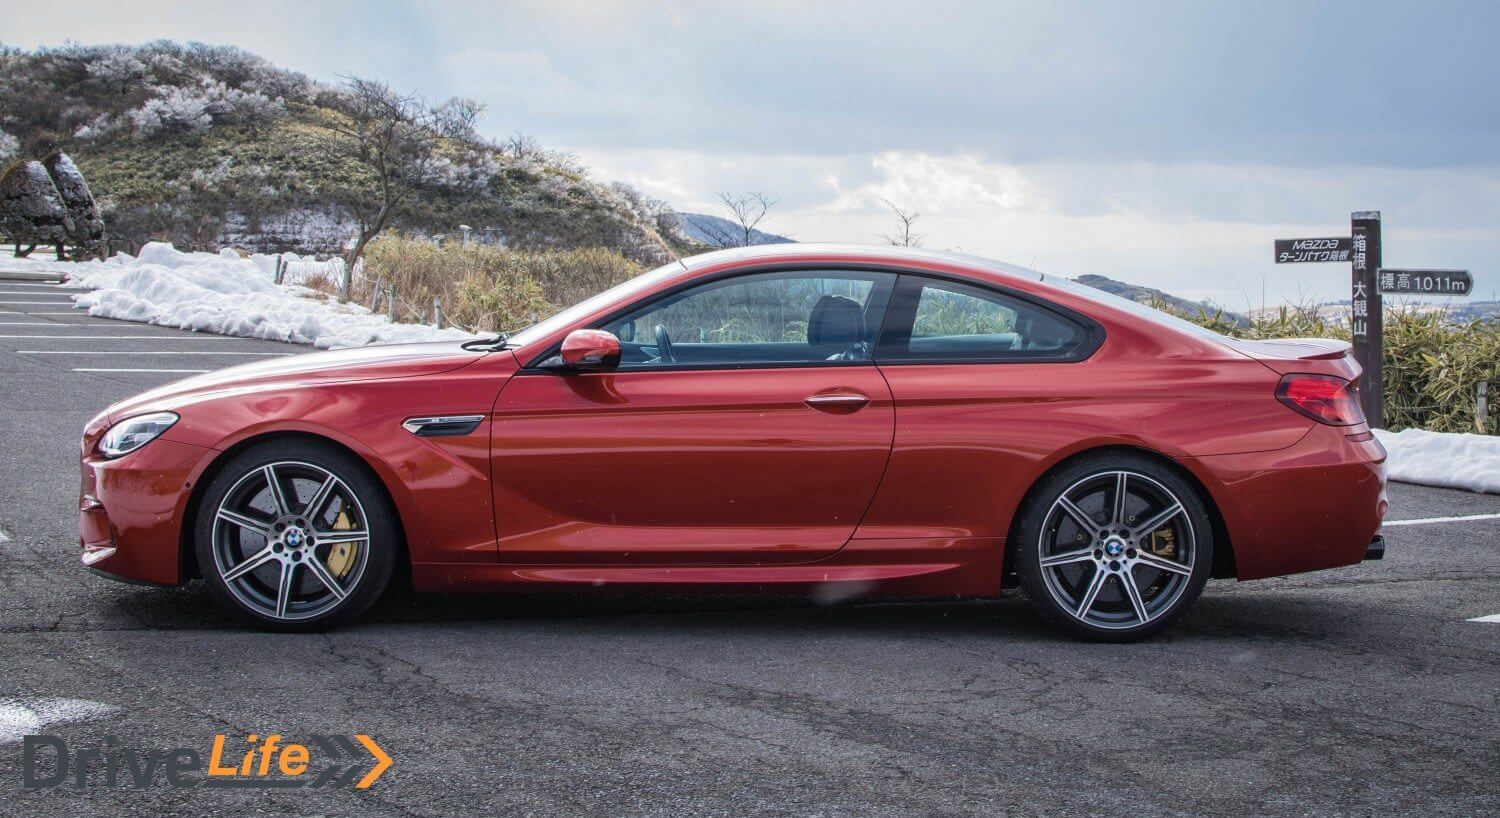 drive-life-nz-car-review-bmw-m6-competition-2016-05